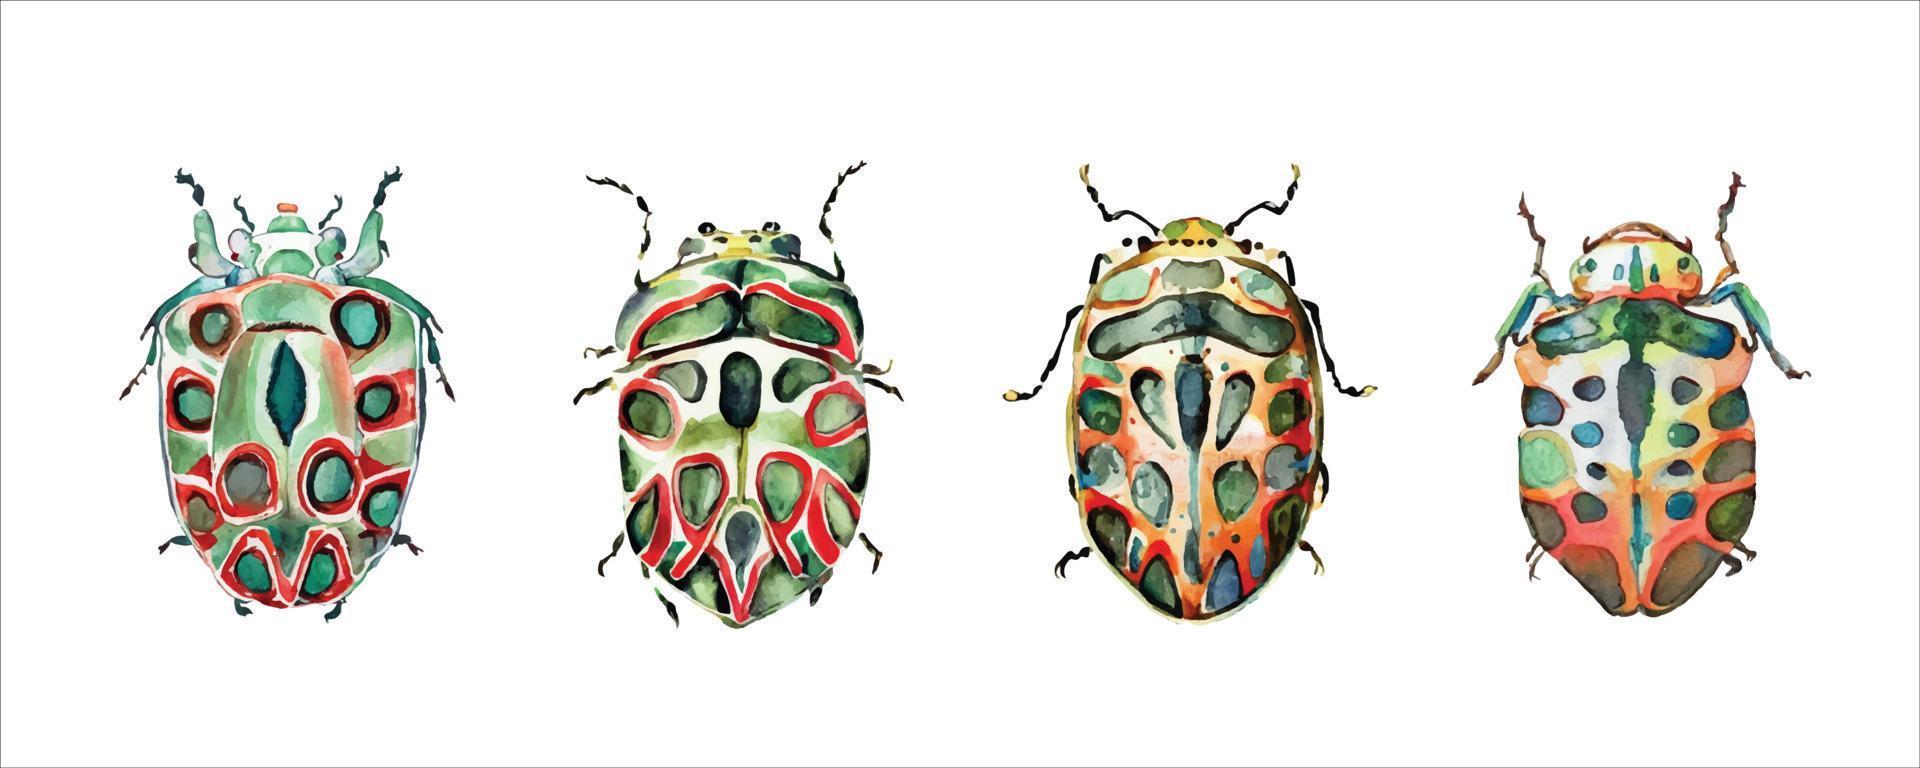 Green watercolor beetles set. Watercolor vector illustration isolted on white